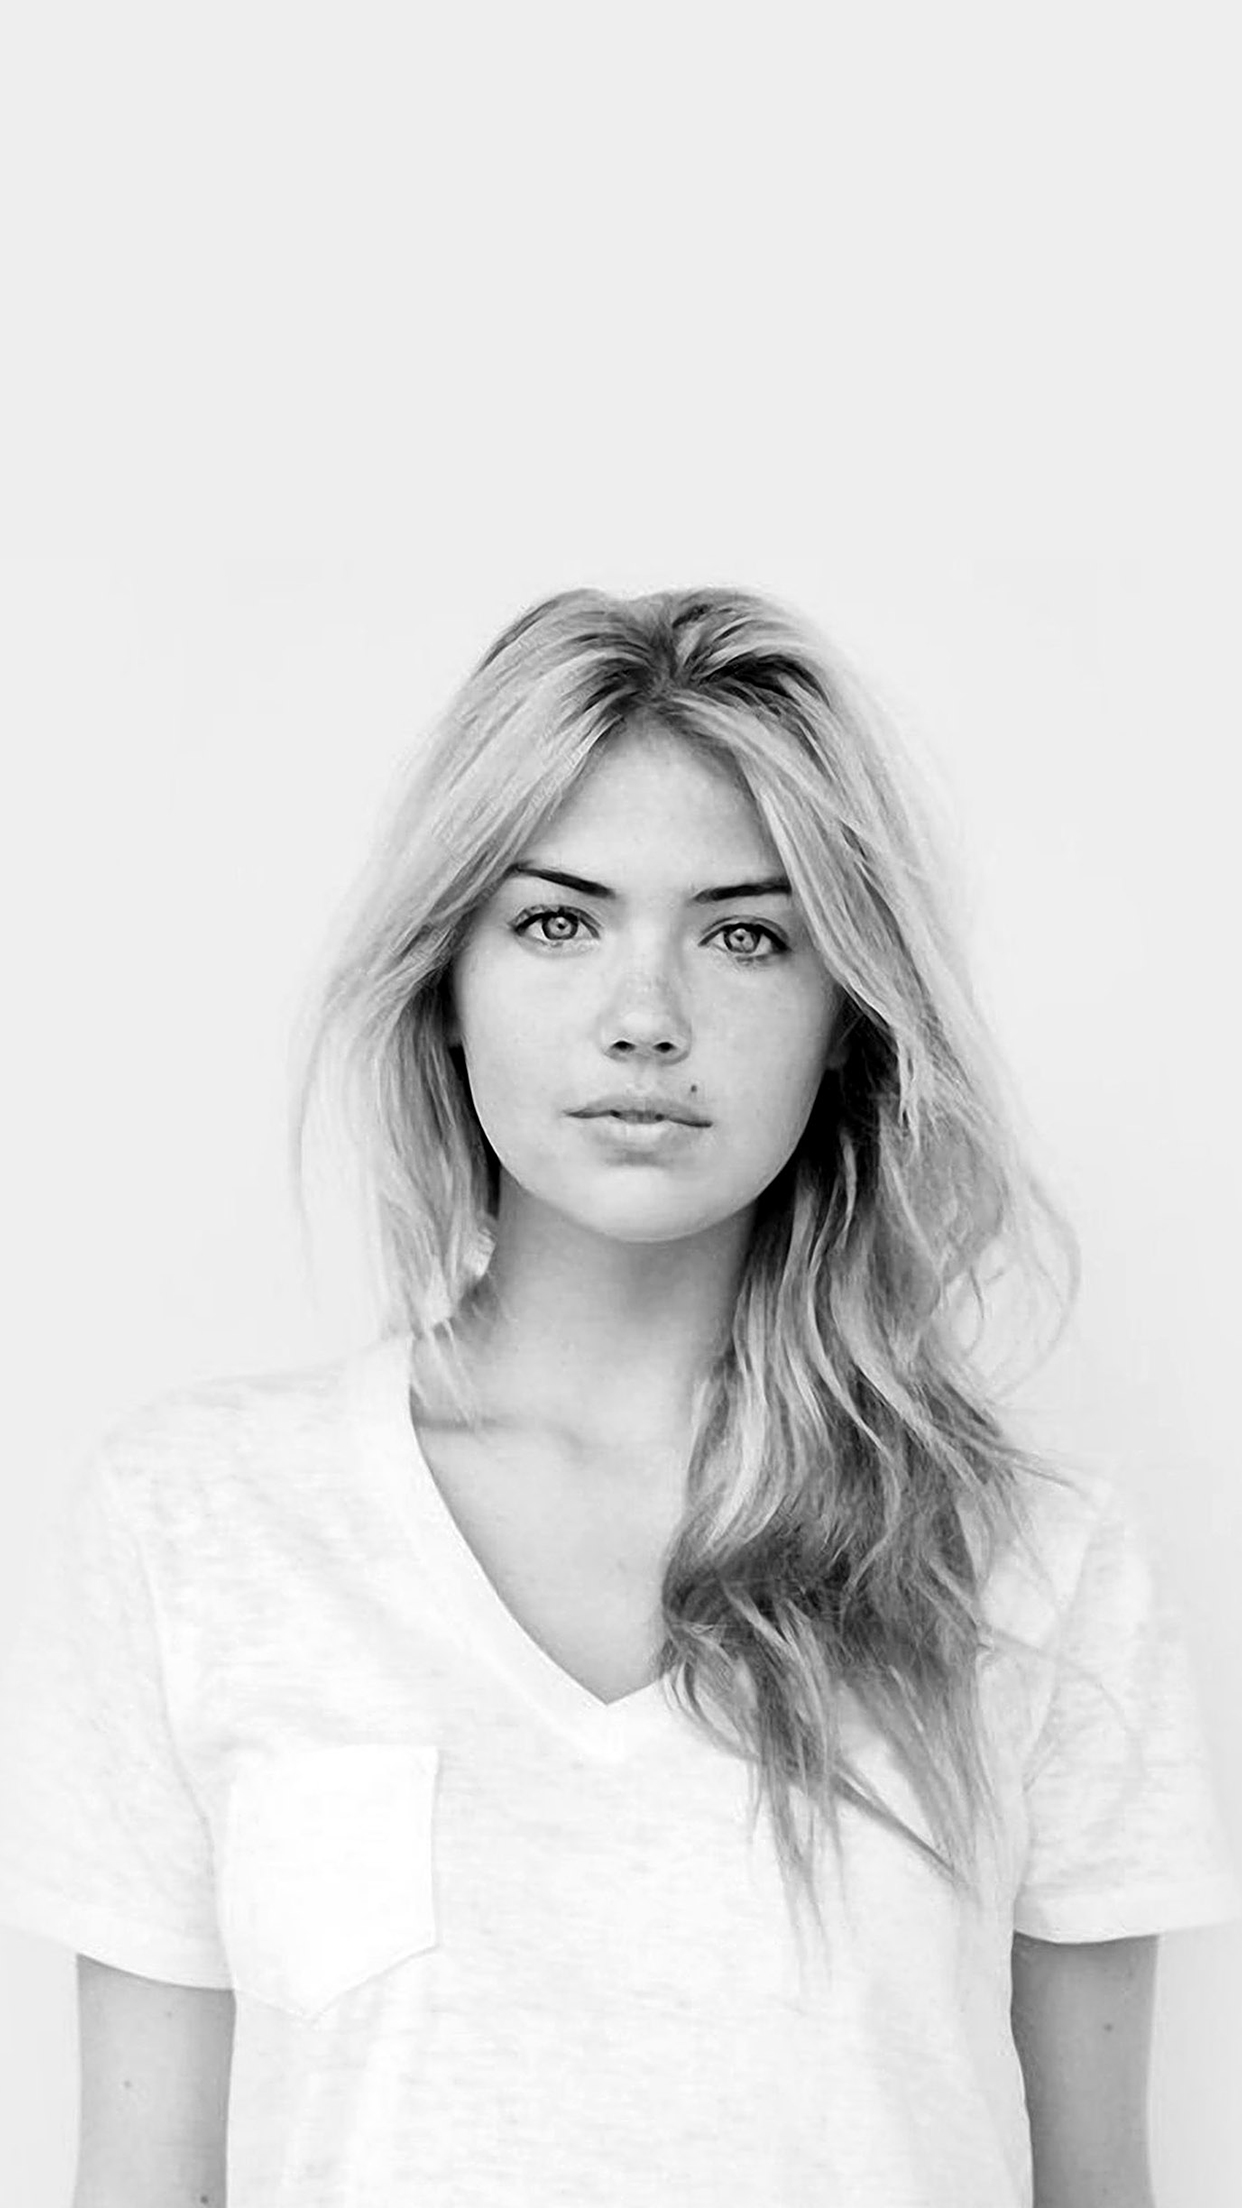 Kate Upton B W Wallpaper For iPhone X On